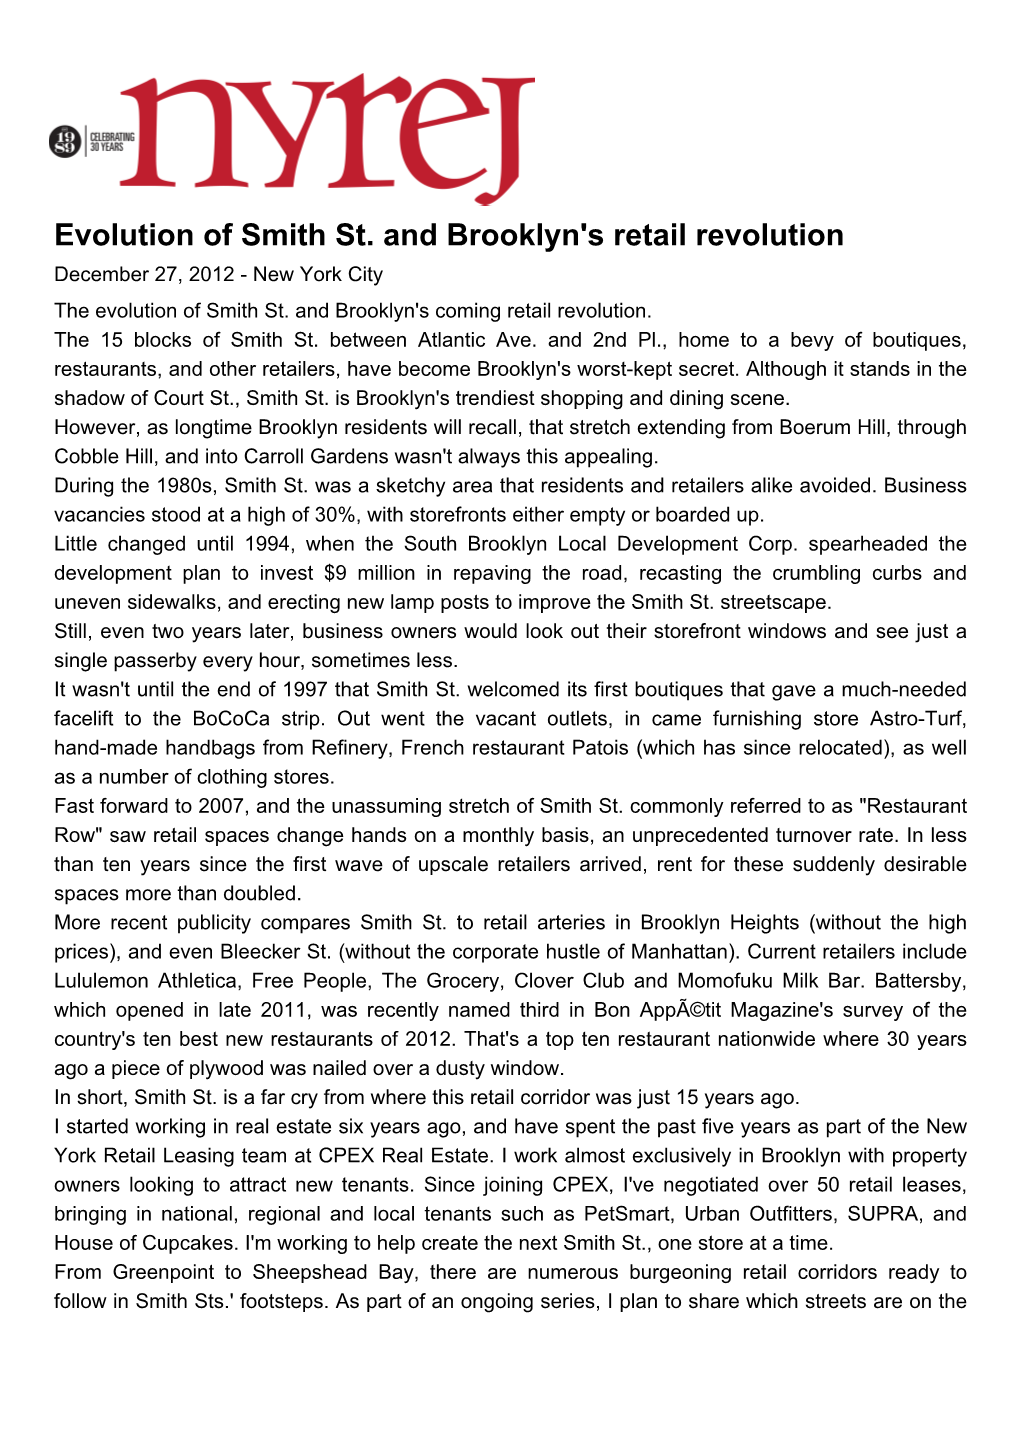 Evolution of Smith St. and Brooklyn's Retail Revolution December 27, 2012 - New York City the Evolution of Smith St